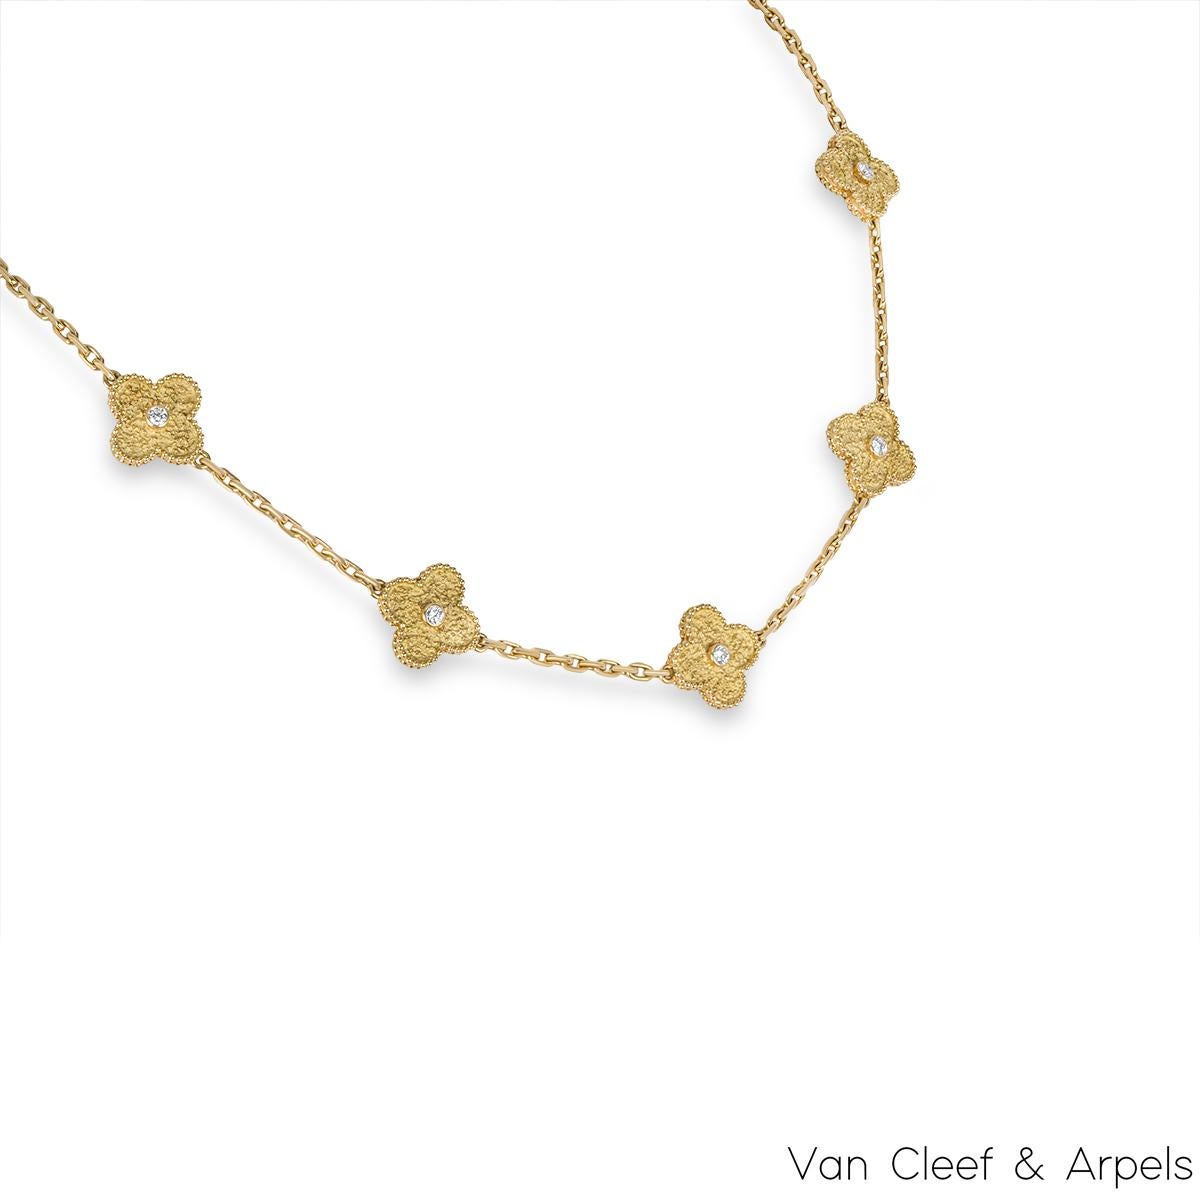 A limited edition 18k yellow gold diamond necklace by Van Cleef & Arpels from the Vintage Alhambra collection. The necklace has 10 motifs, each set with a textured pattern, a bezel set round brilliant cut diamond and complemented by a beaded outer